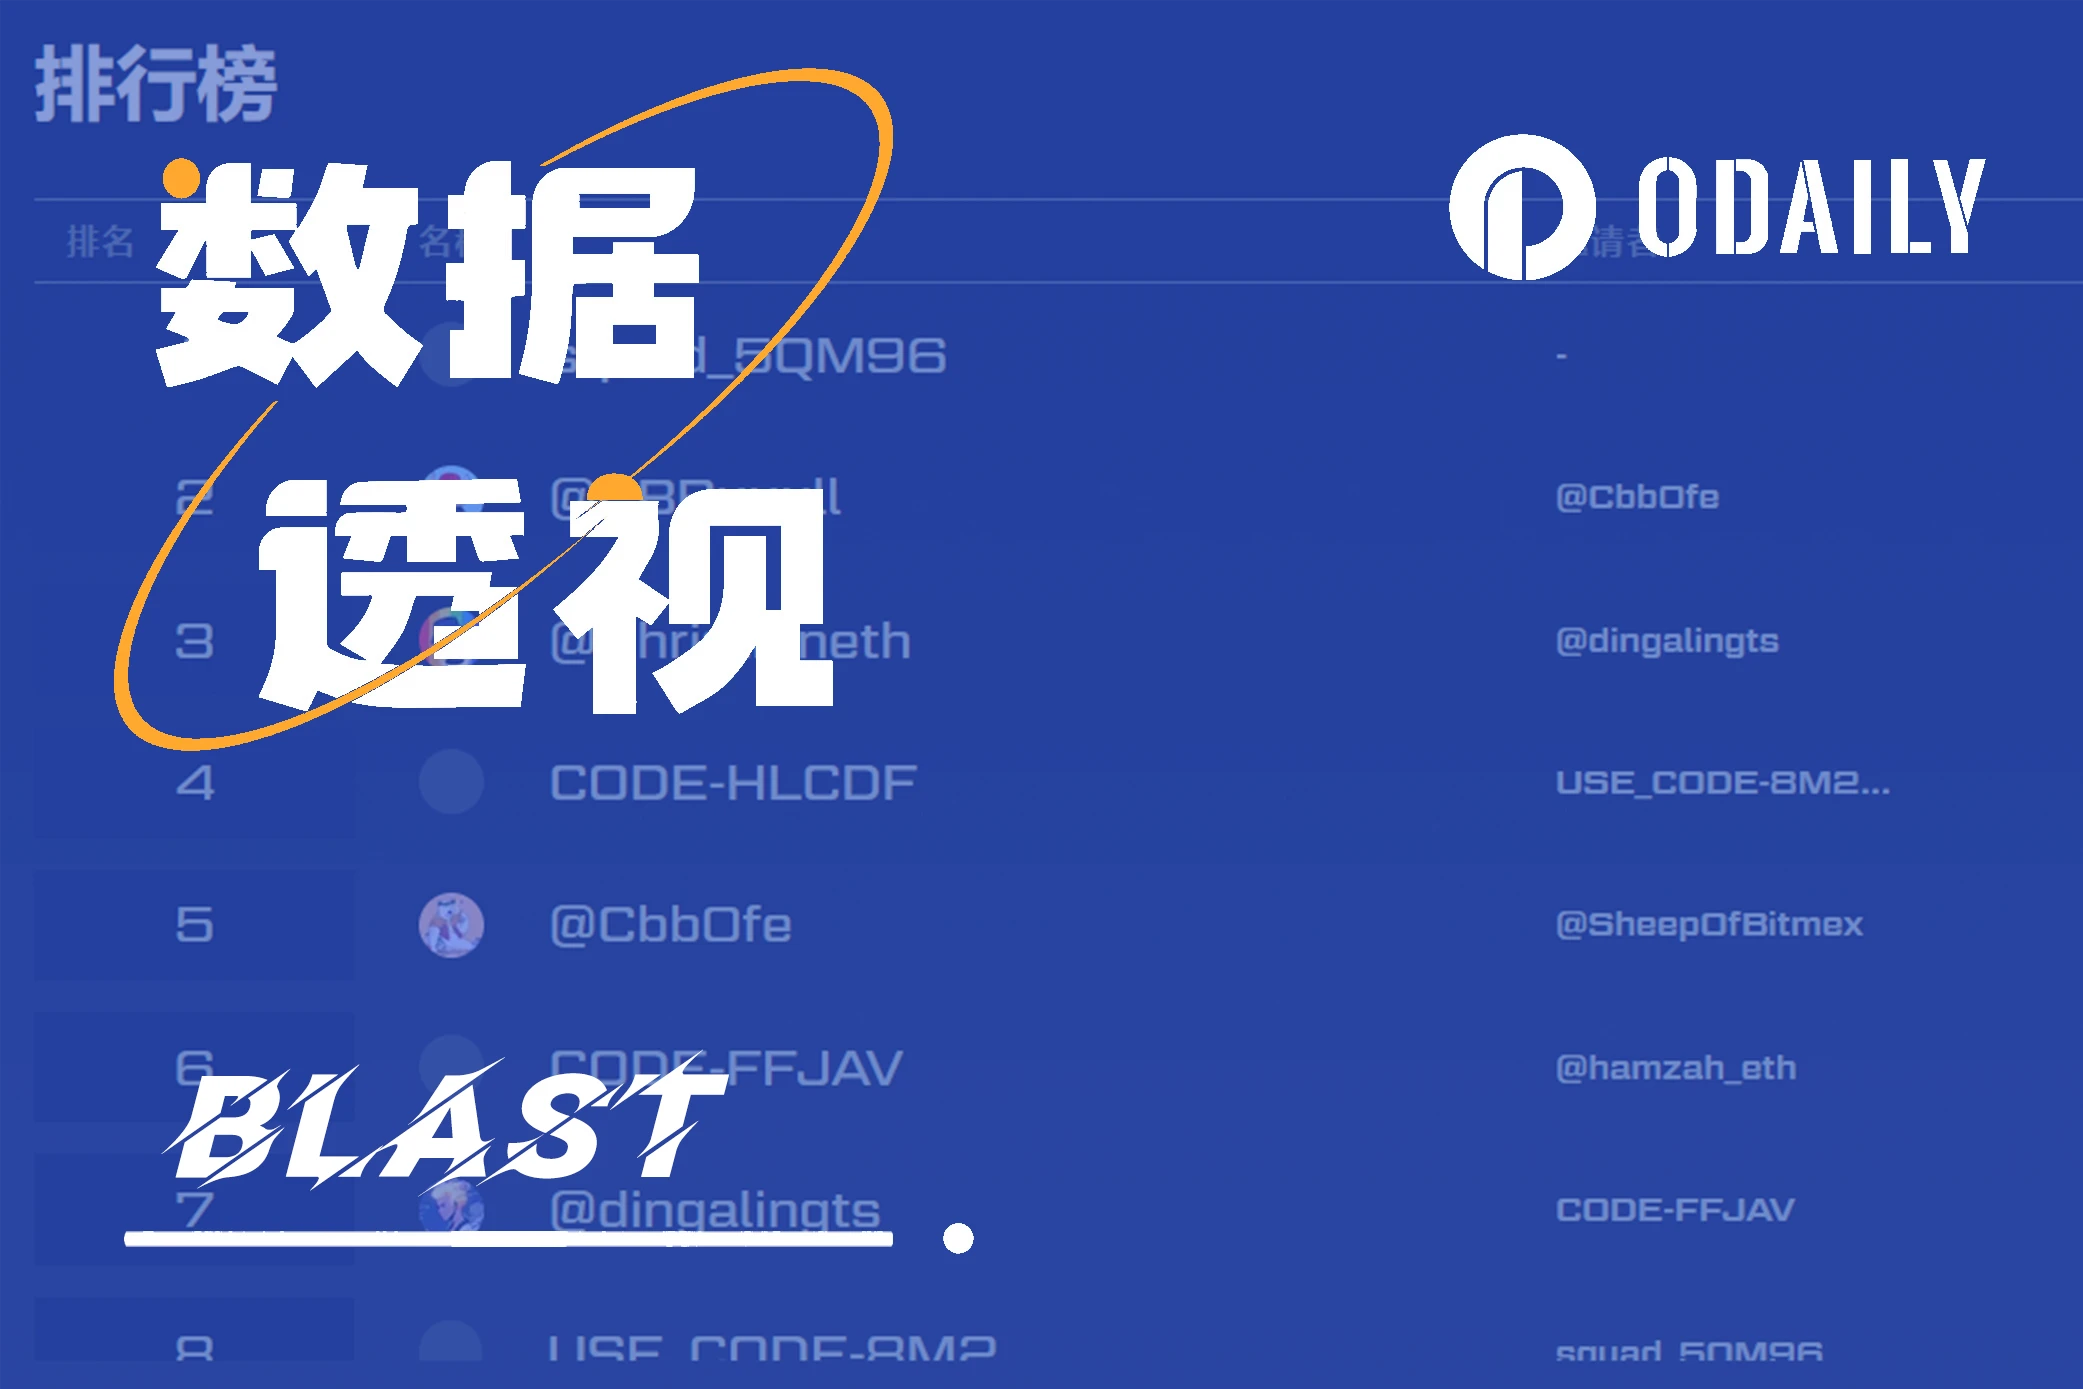 TVL exceeded US million within 10 hours of launch. This article explains Blast’s competition in detail